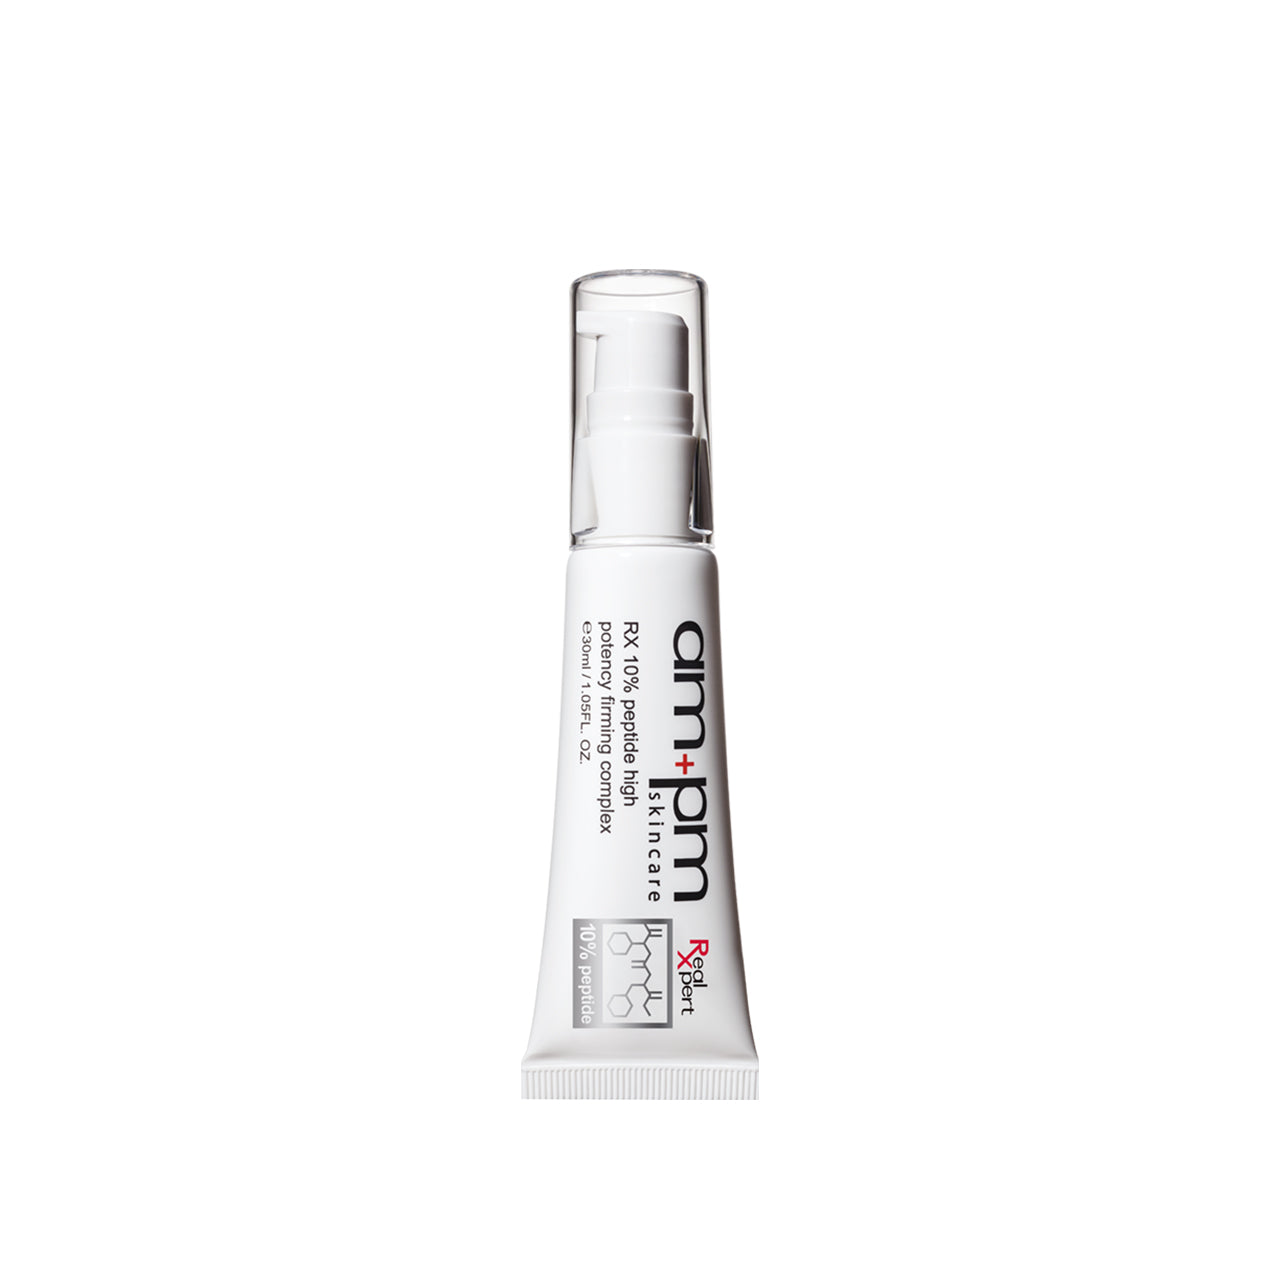 am+pm RX10 Peptide High Potency Firming Complex